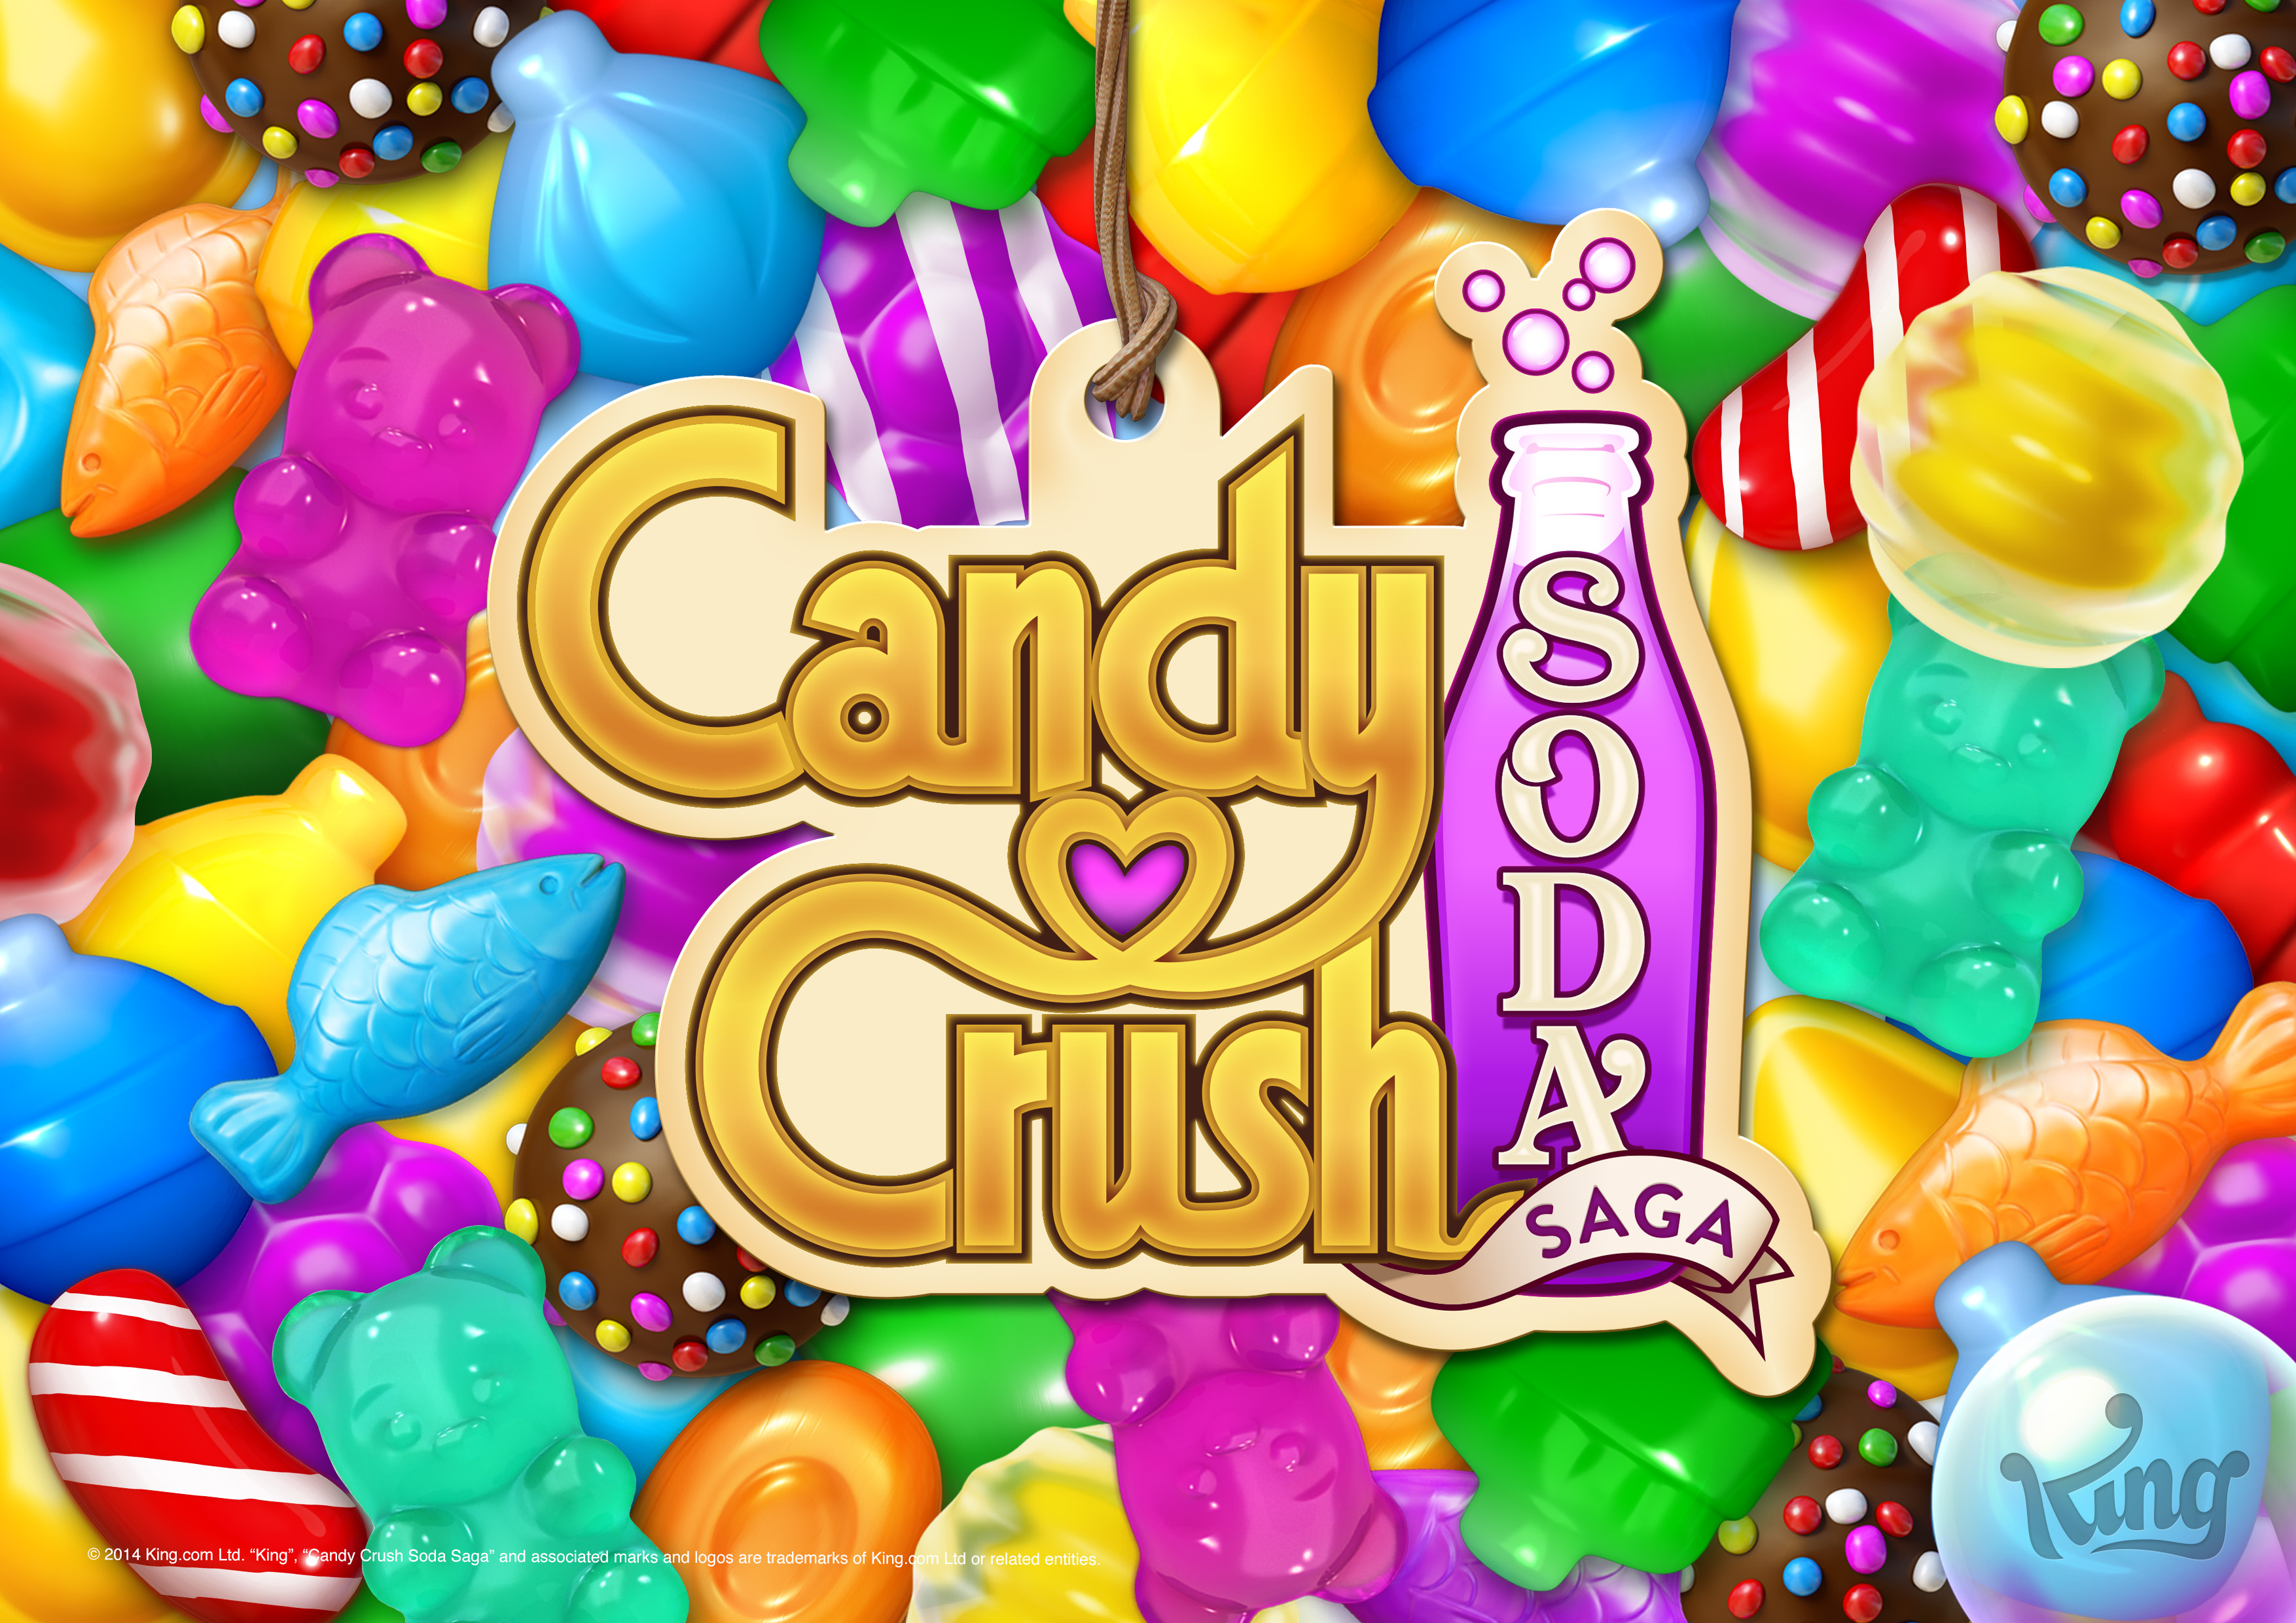 Candy Crush Soda Saga (by King.com Limited) - iOS / Android - HD Gameplay  Trailer 